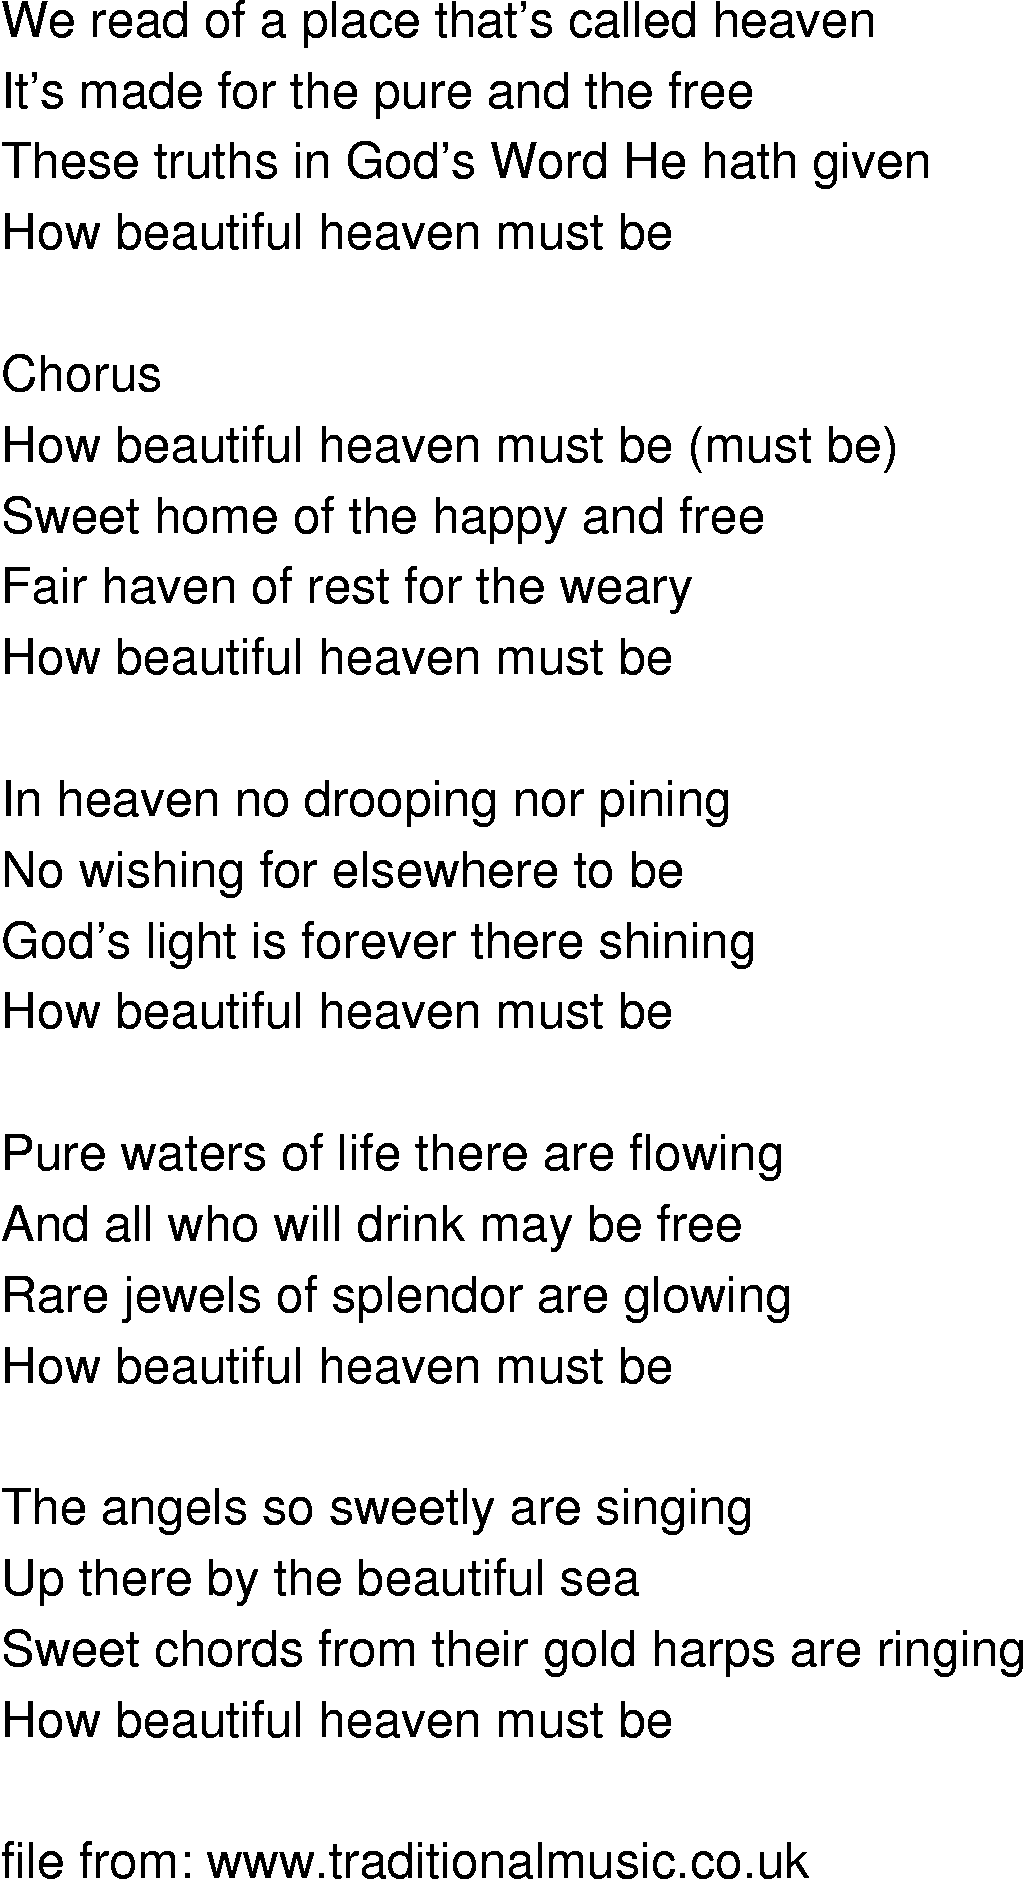 Old-Time (oldtimey) Song Lyrics - how beautiful heaven must be